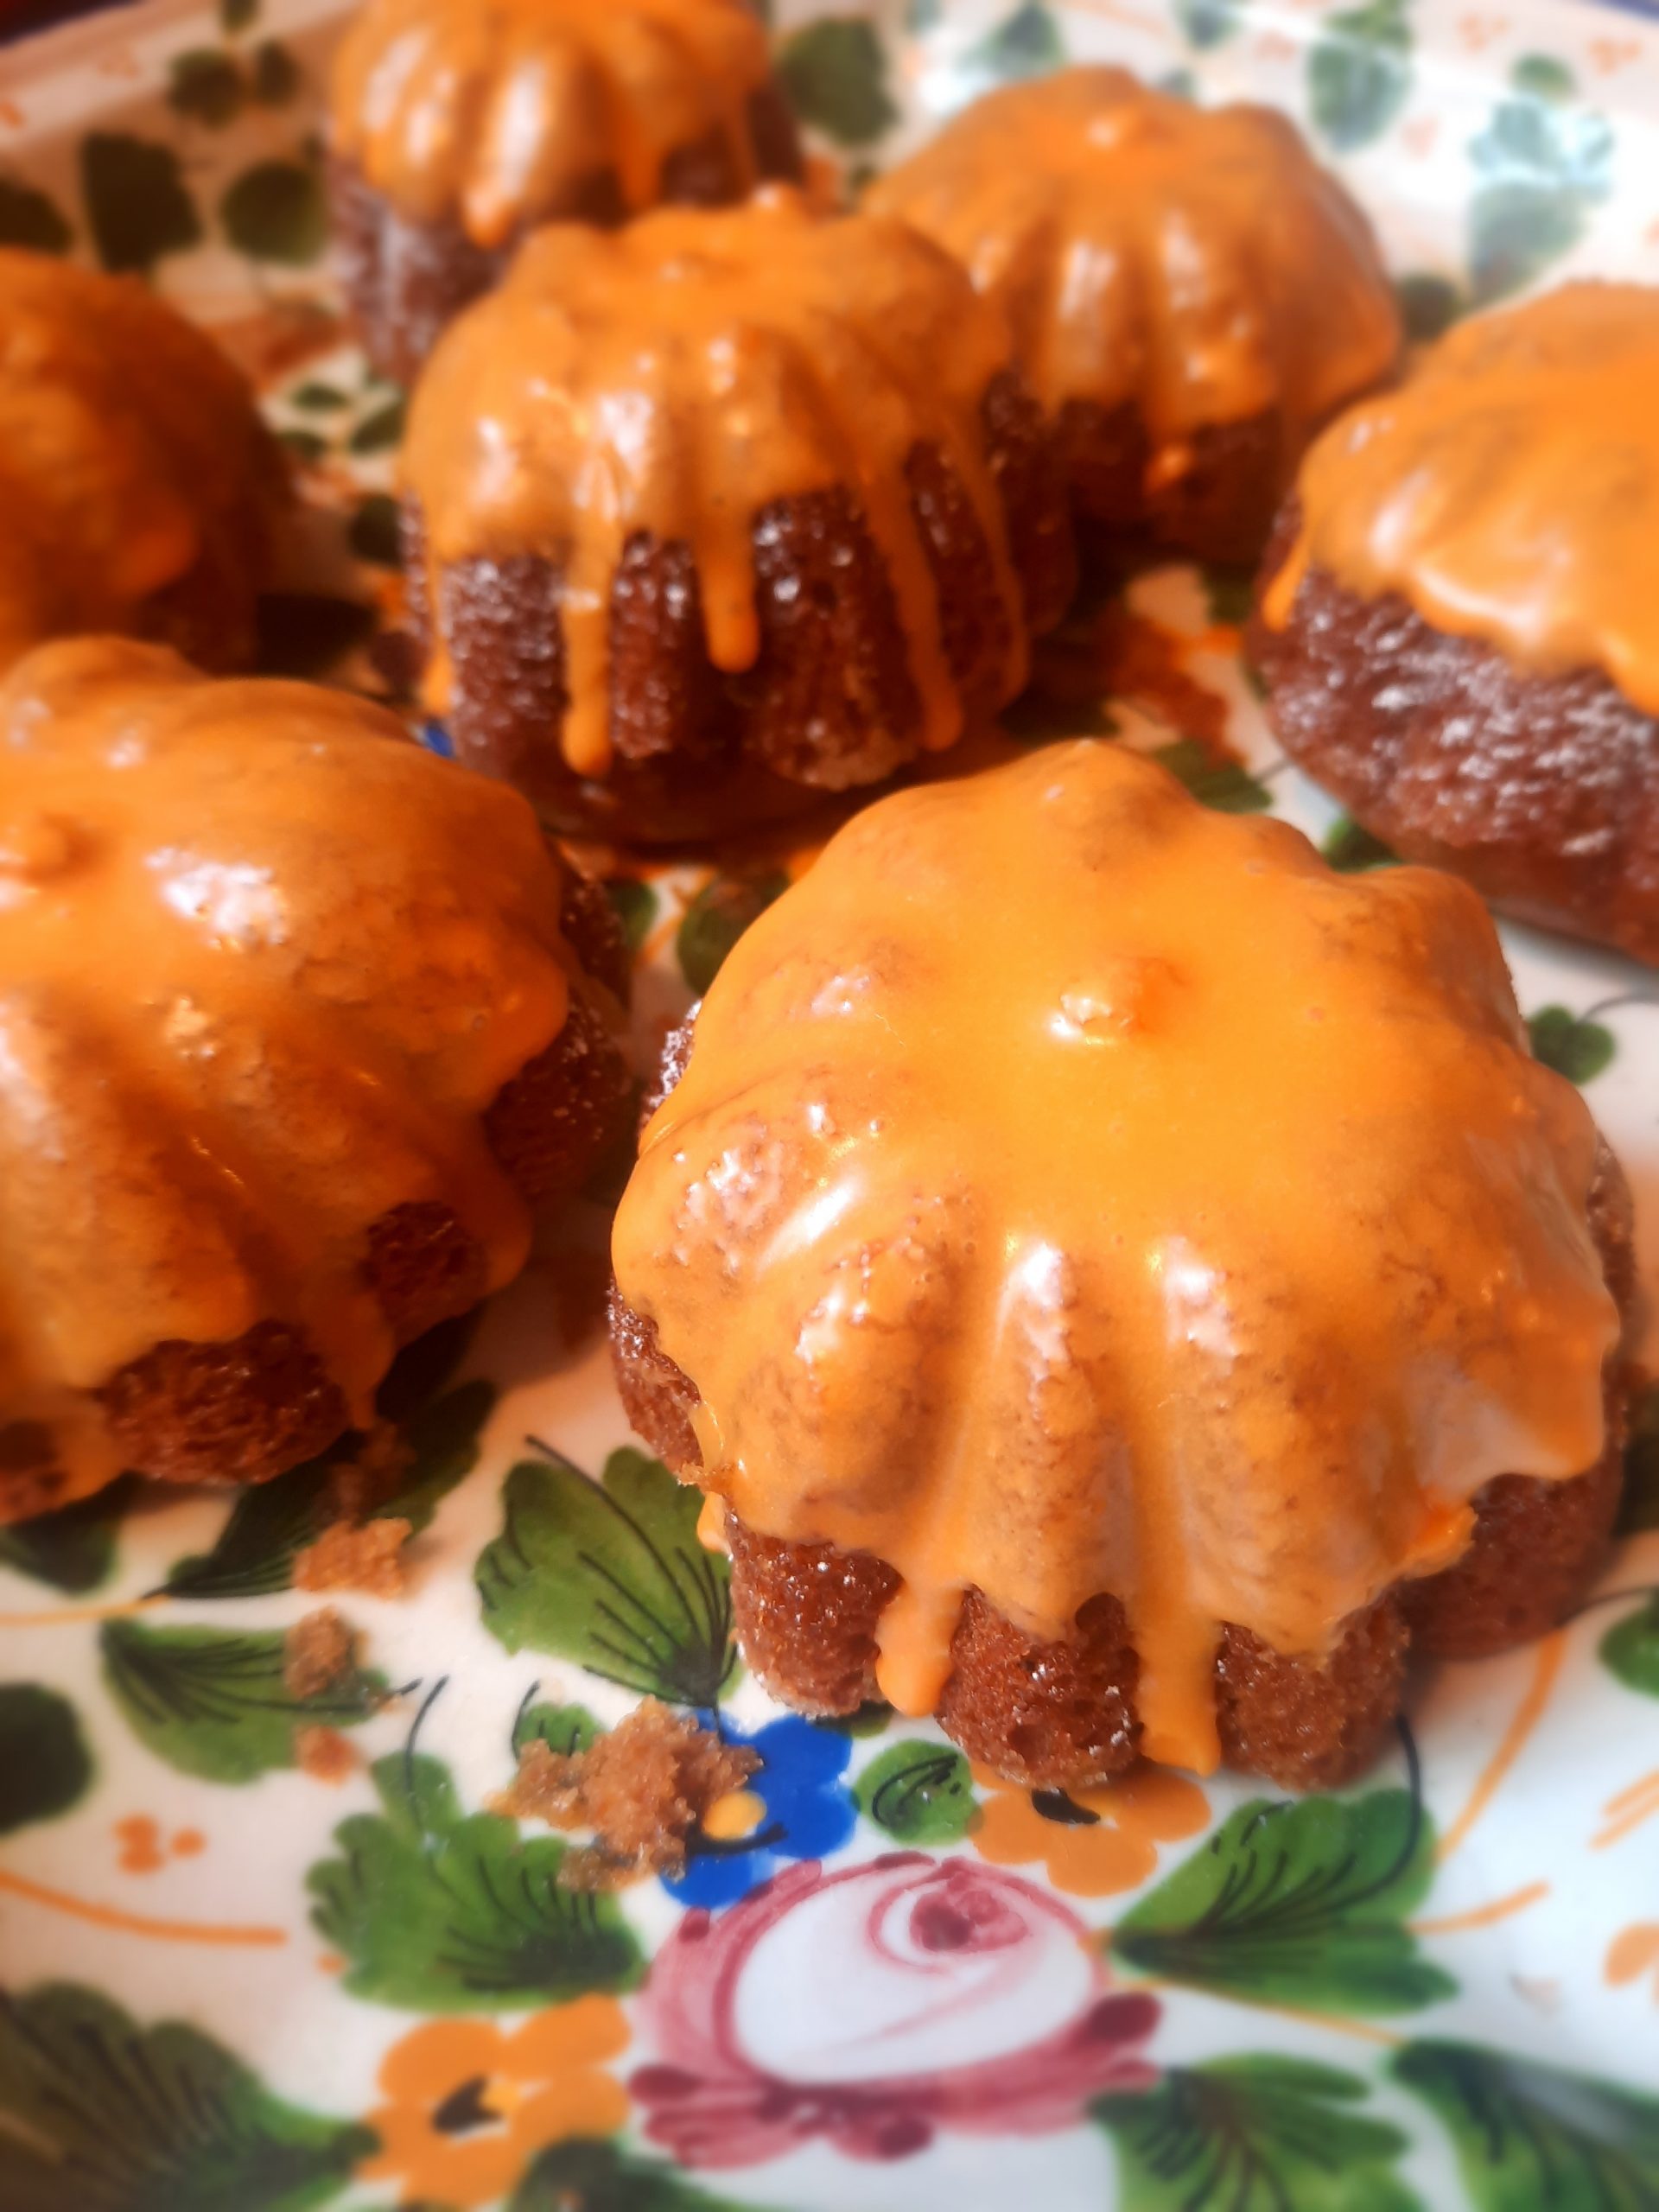 Pumpkin bundt cake the perfect treat for fans of fall flavors